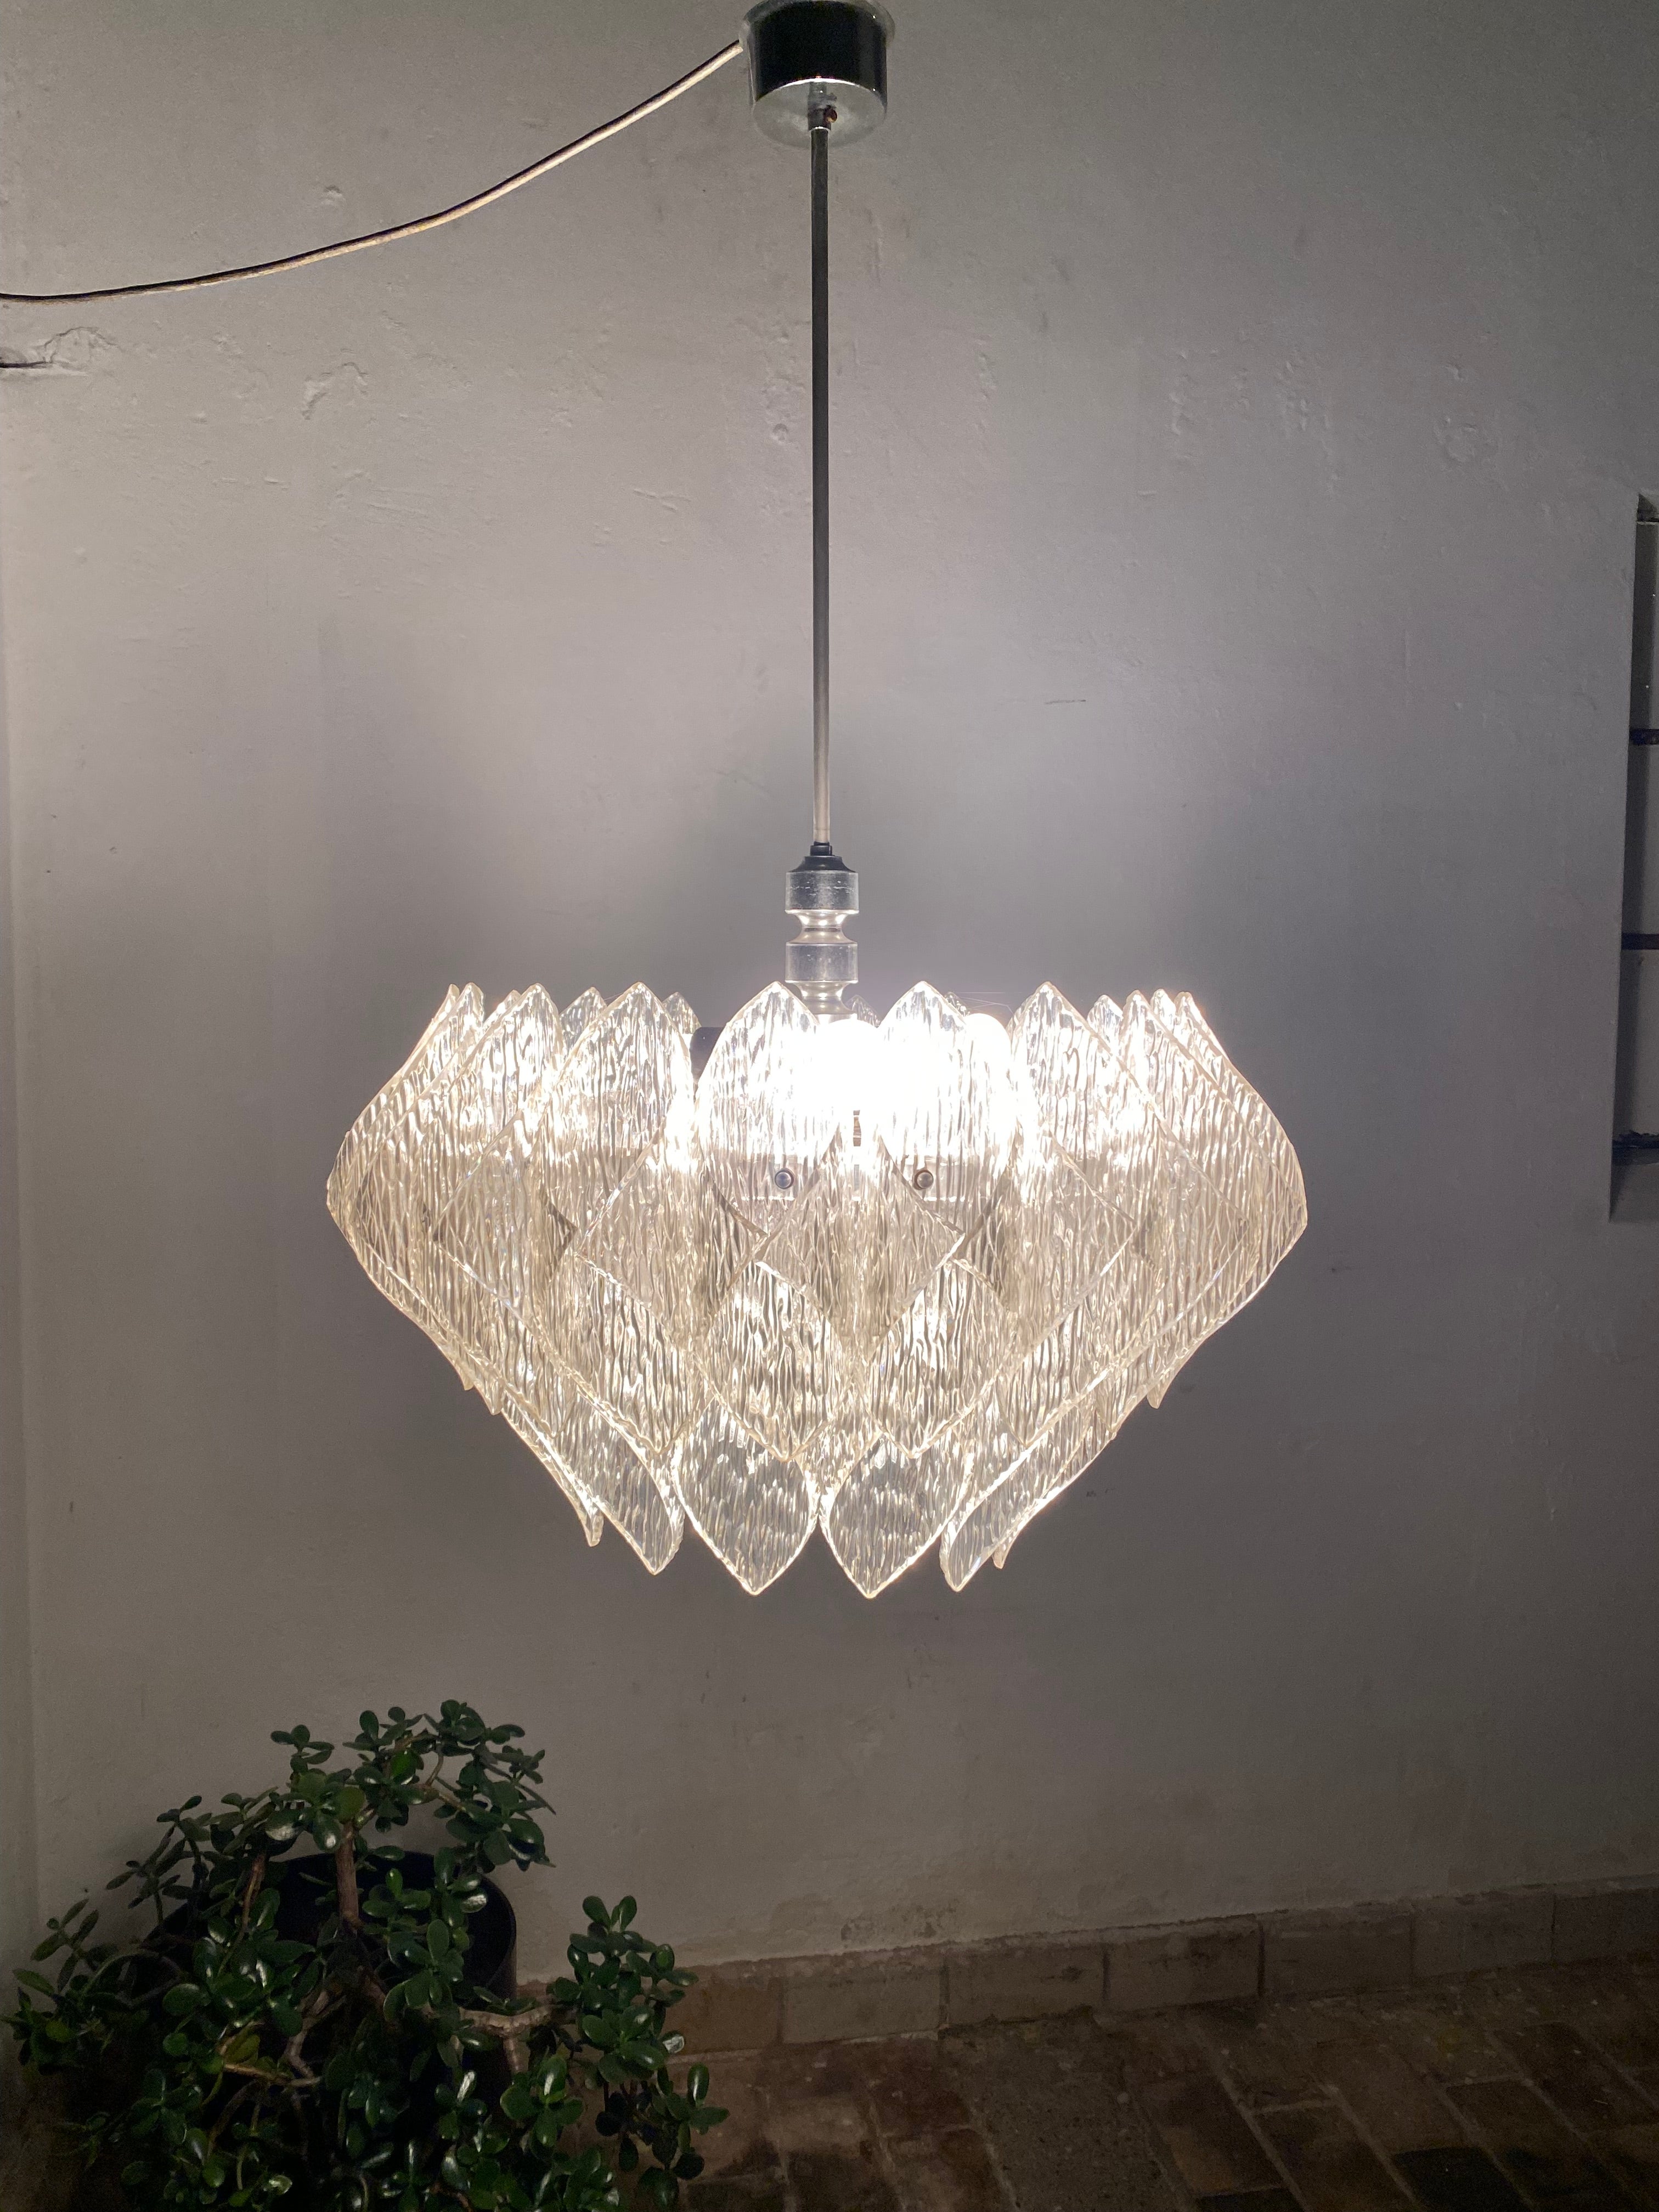 Large Space Age chandelier from the company ME Marbach Leuchten from Erbach in the Odenwald, Germany from the 1960's

ME Marbach Leuchten made their own versions of the famous Kalmar glass chandeliers using the (back then) innovative Space Age